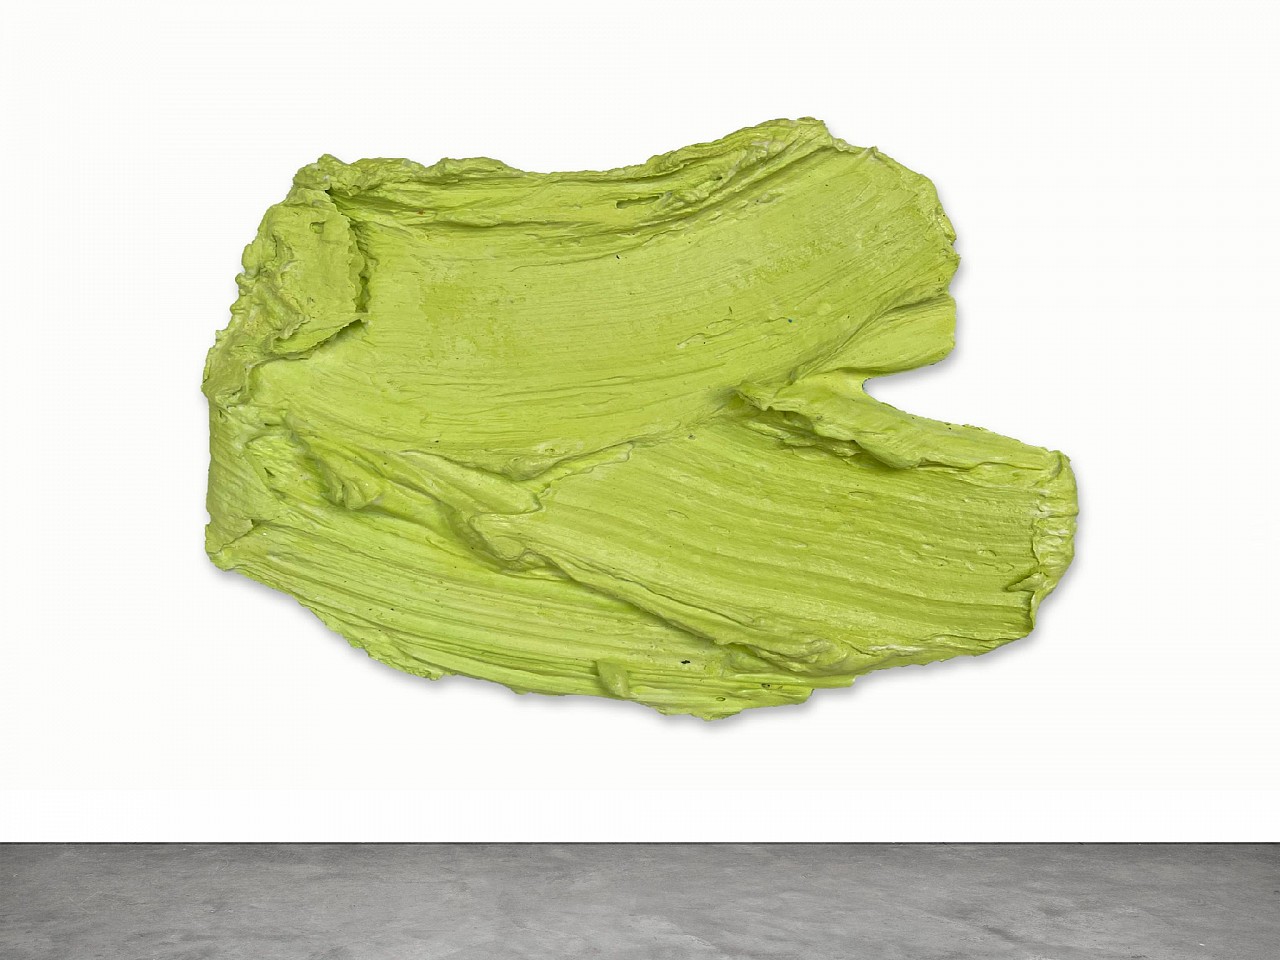 Donald Martiny, Pashley, 2011
polymer and pigment on aluminum, 11 x 16 in.
MART00147